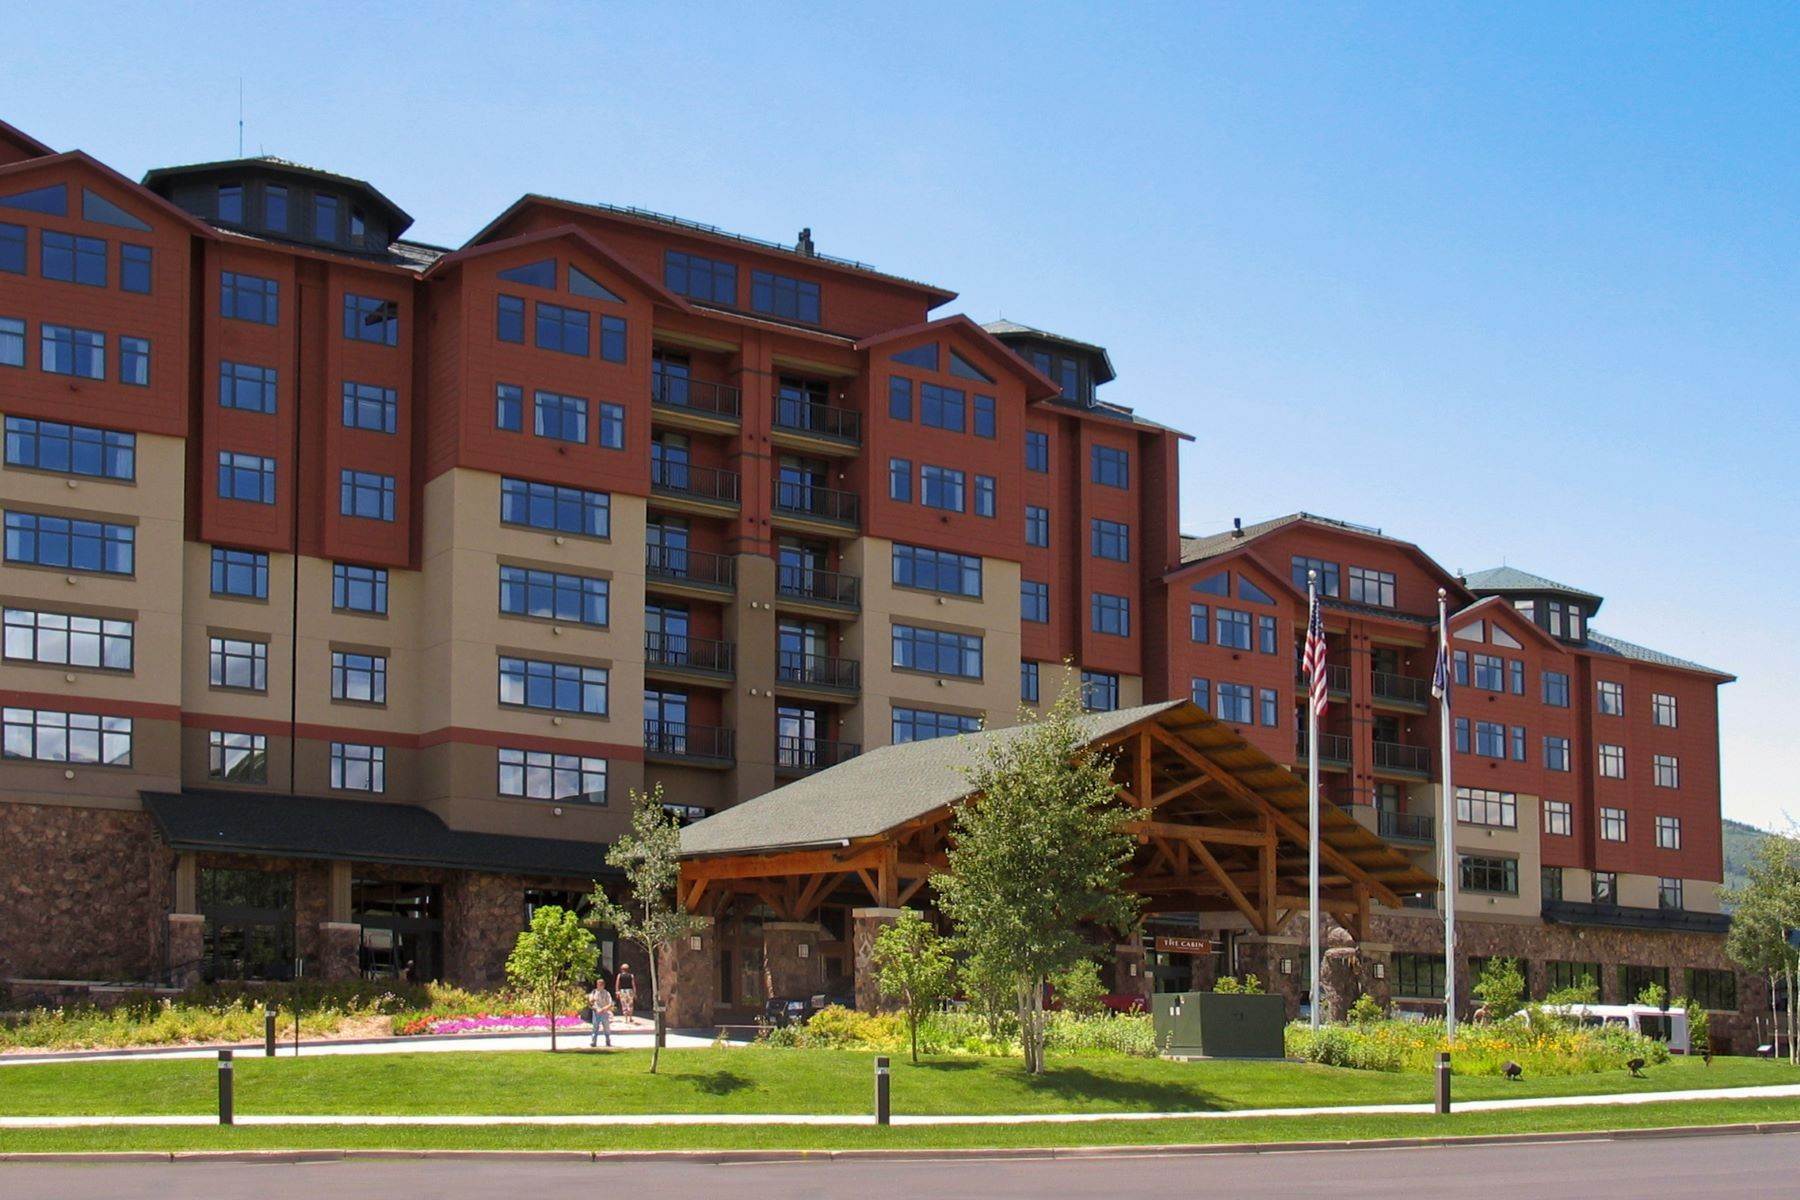 Property for Sale at Steamboat Grand Resort Eighth Share Fractional Ownership 2300 Mt. Werner Circle 228/229 Cal 8 Steamboat Springs, Colorado 80487 United States